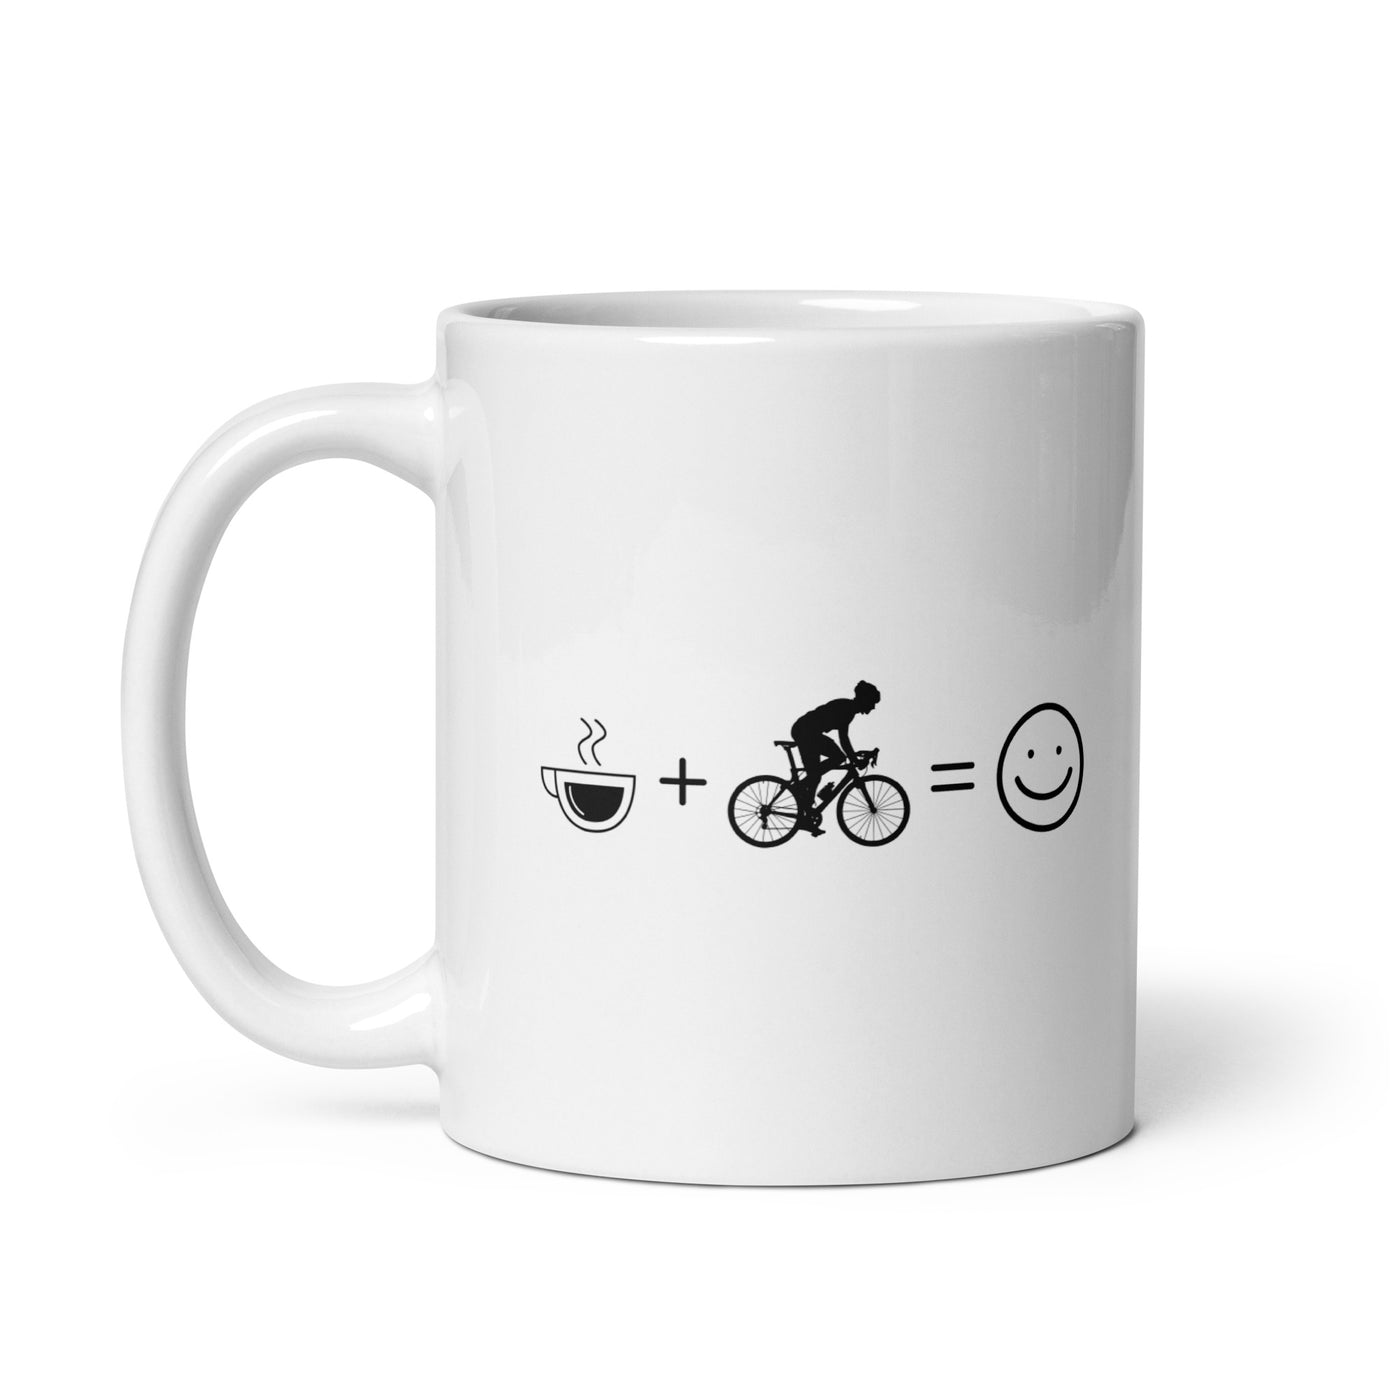 Coffee Smile Face And Cycling 1 - Tasse fahrrad 11oz